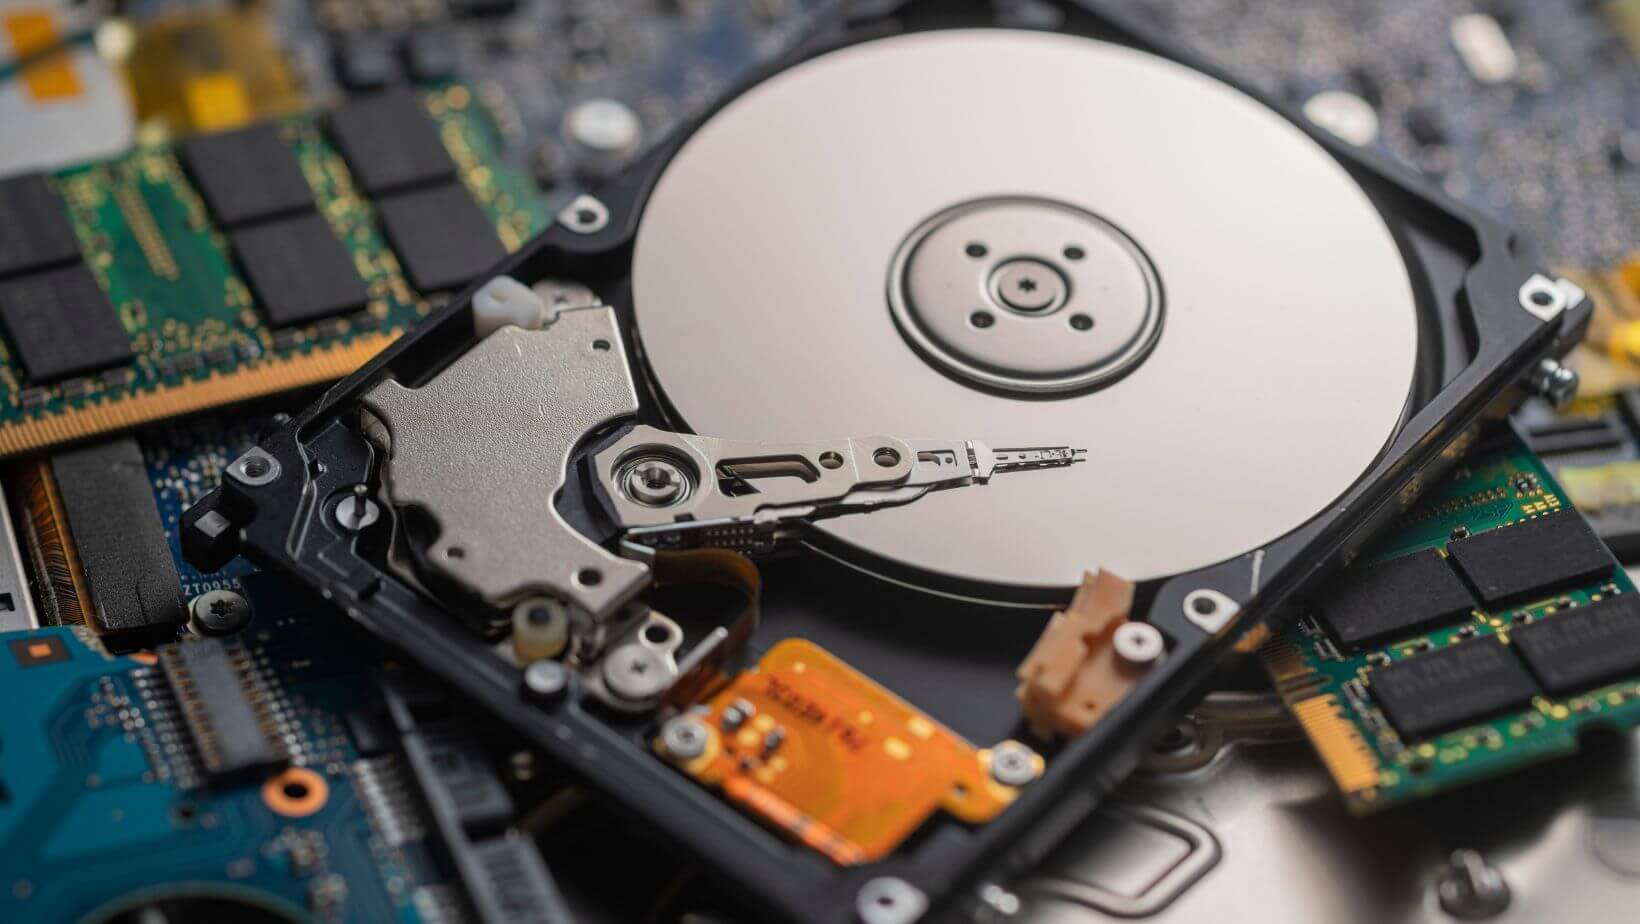 The Best Way to Securely Remove Private Data From Your Old Computer